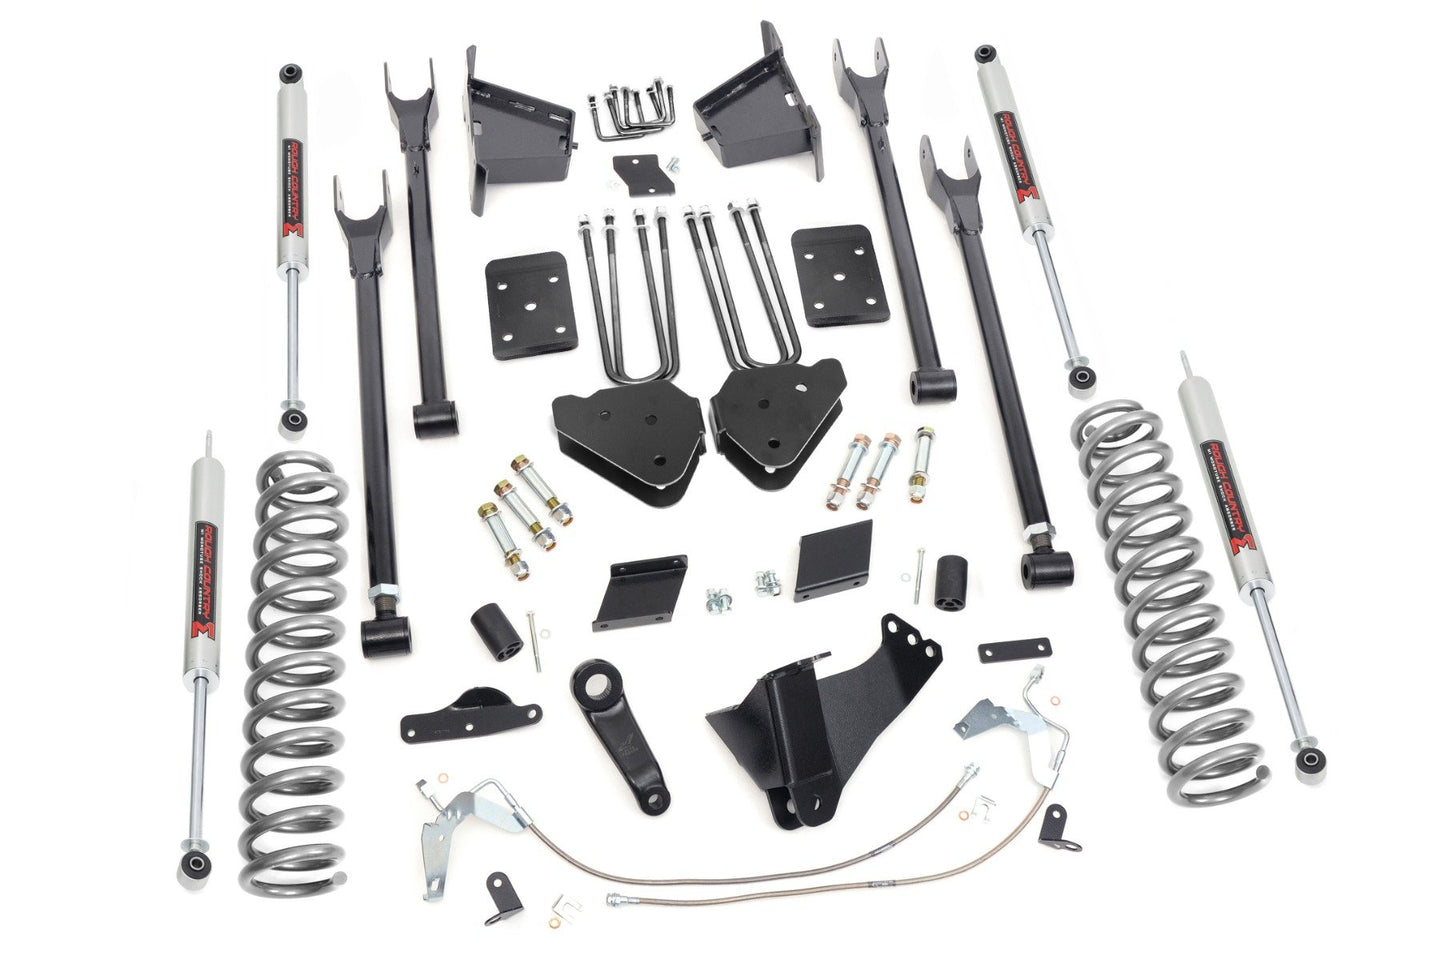 6 Inch Lift Kit | 4 Link | OVLD | M1 | Ford F-250 Super Duty (15-16) - Off Road Canada